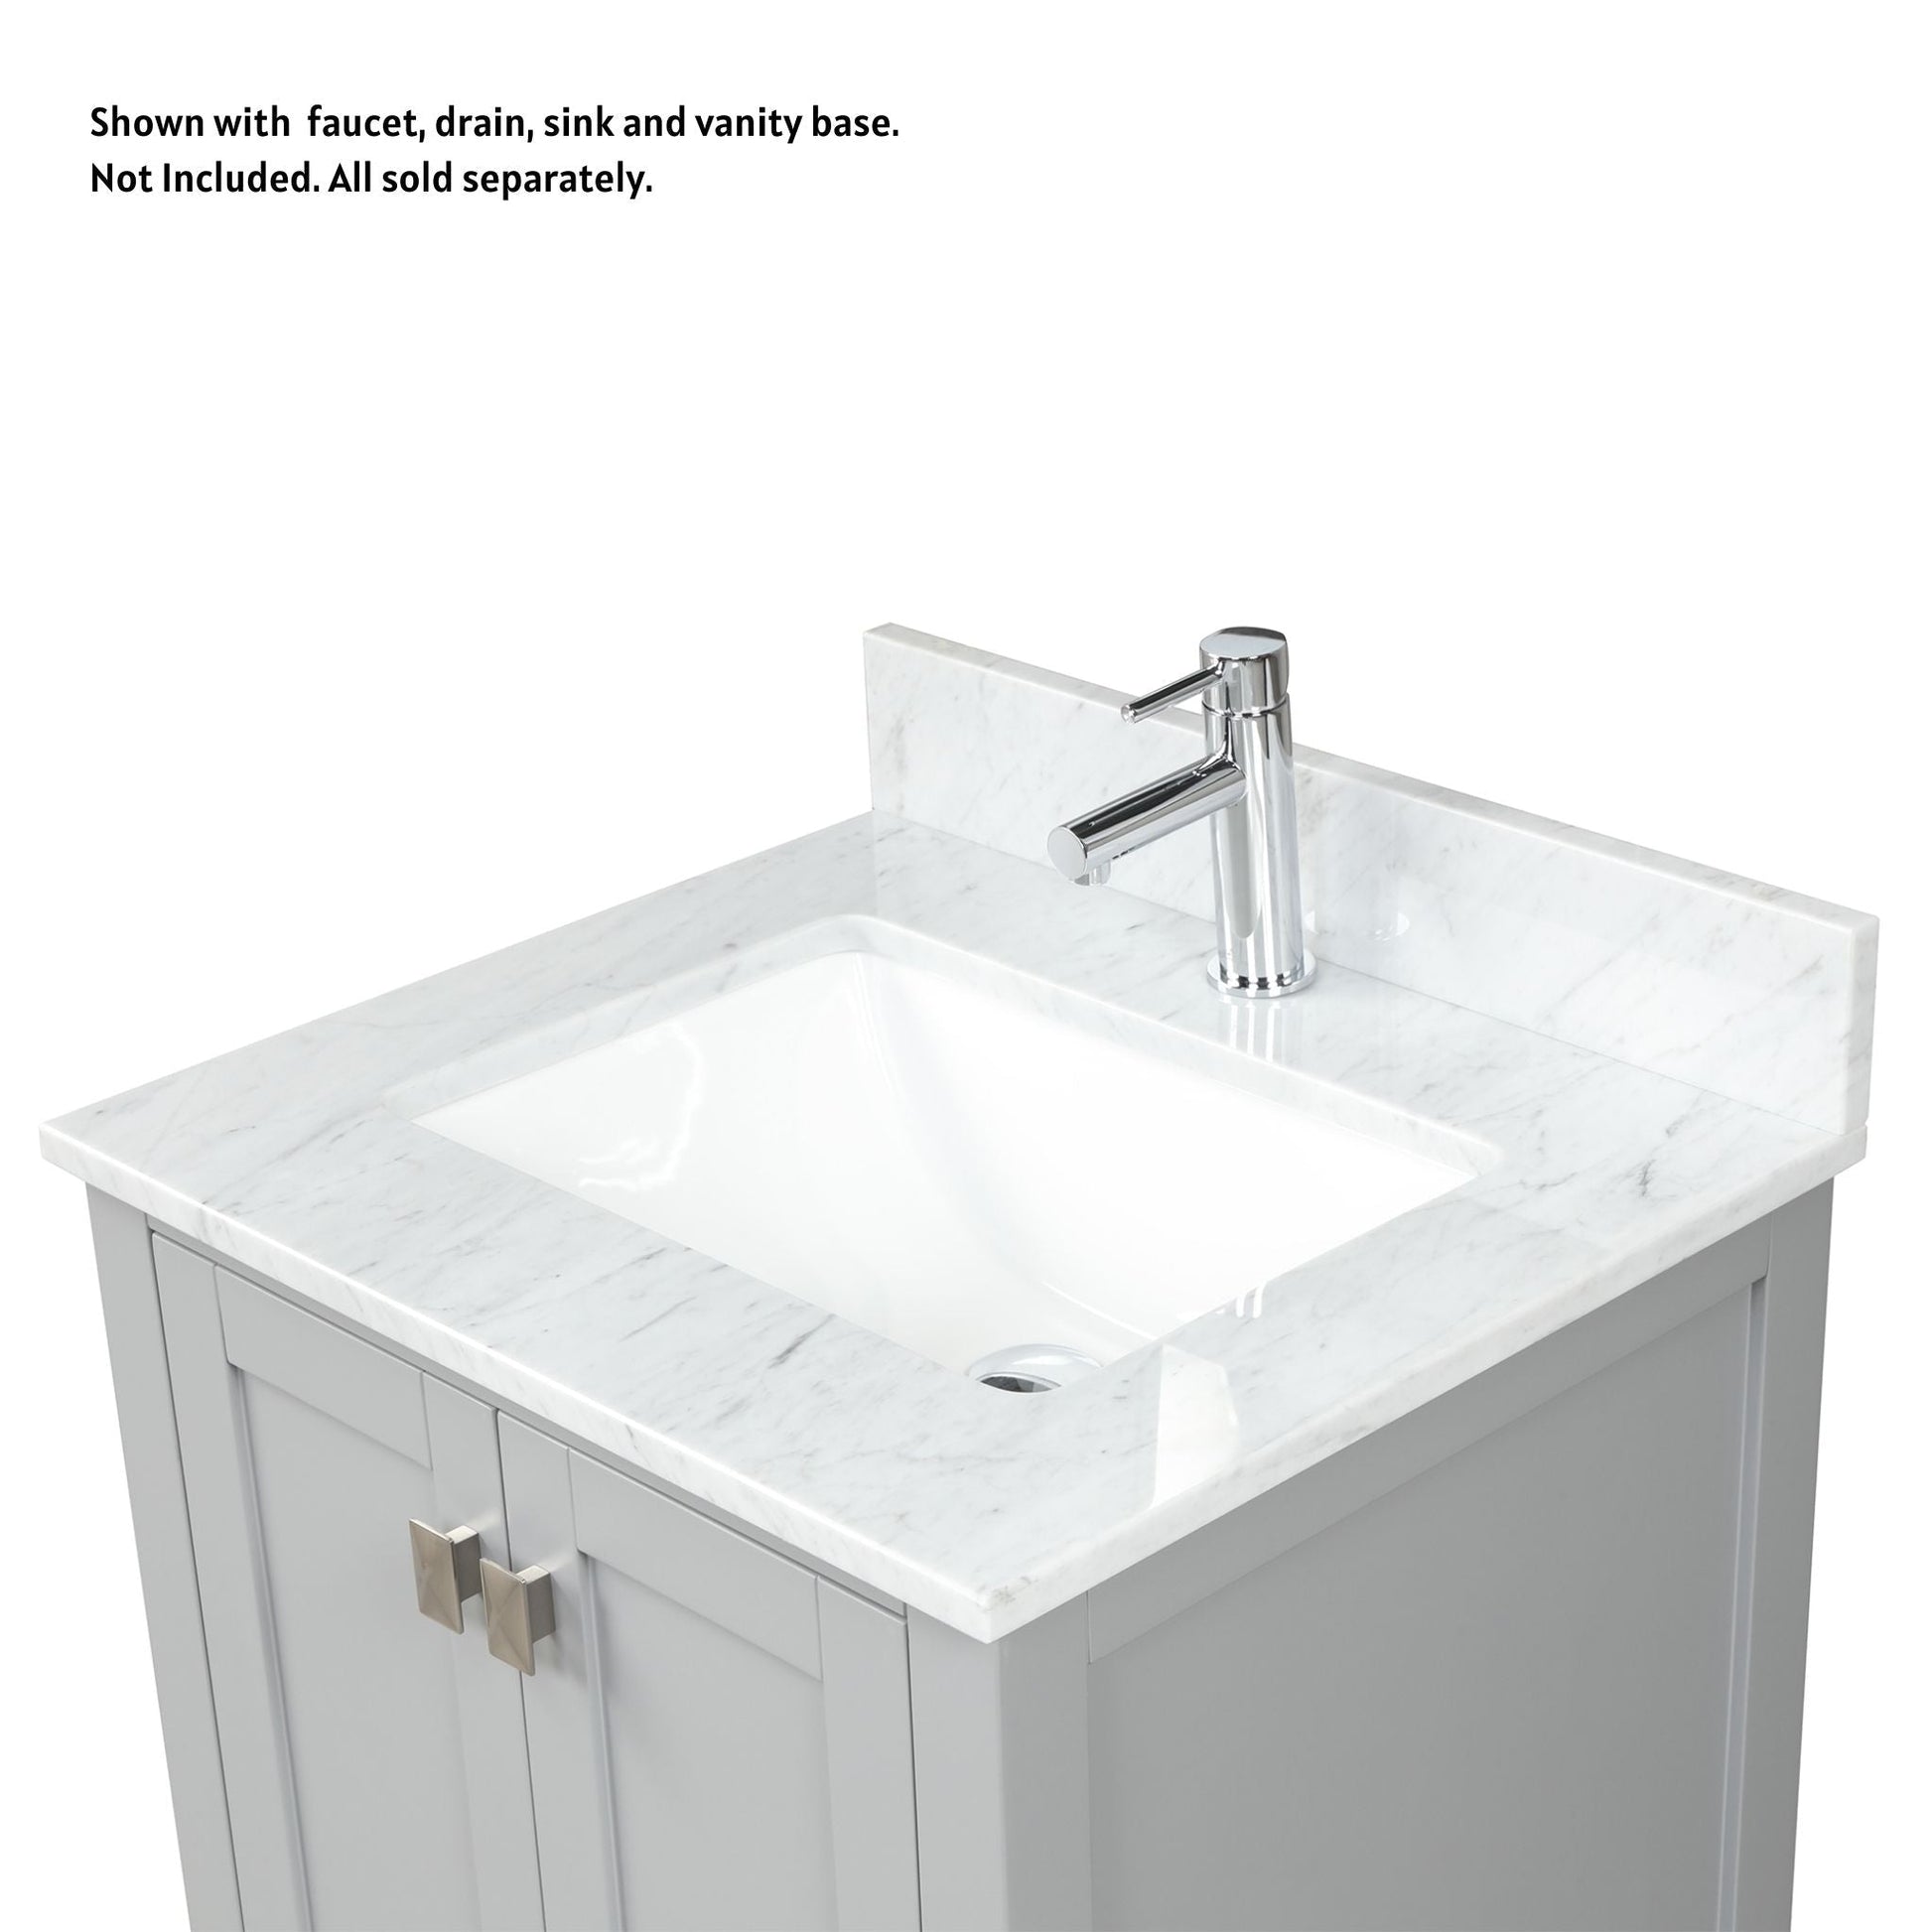 Blossom CT5 2422 03 1813 24" x 22" White Carrara Marble Vanity Top With Single Sink Hole And Backsplash